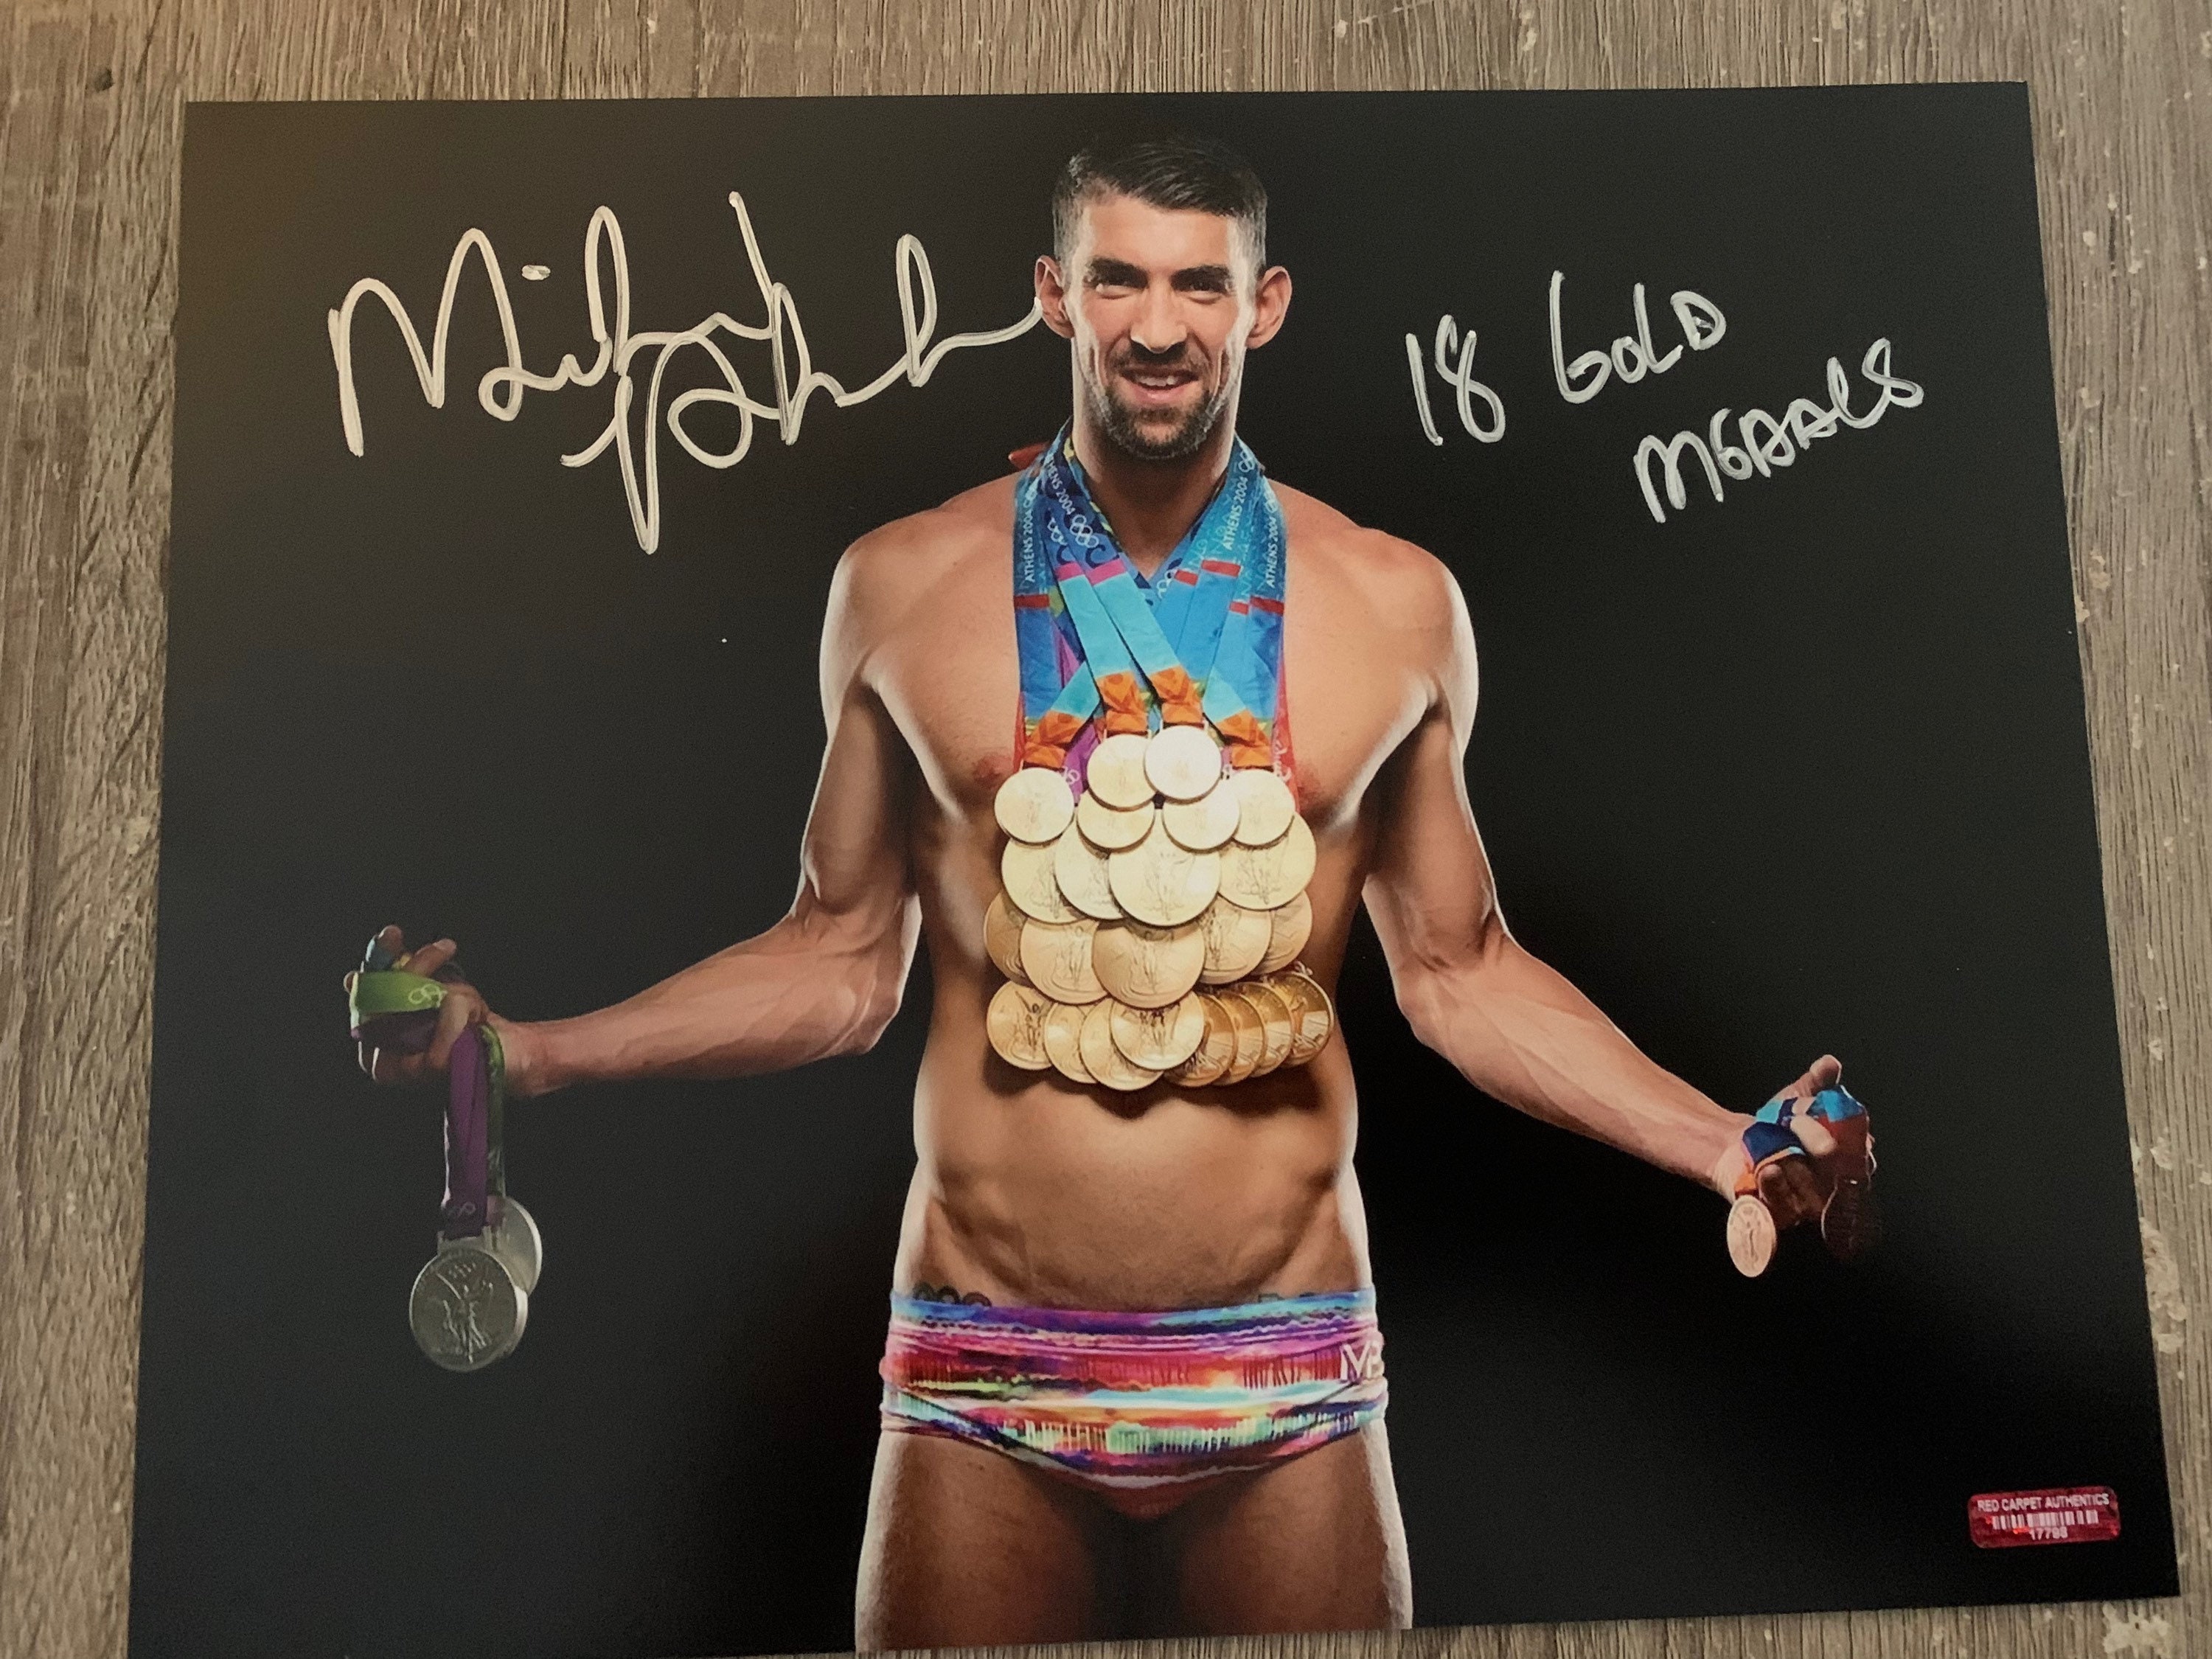 MICHAEL PHELPS Mounted Signed Photo Reproduction Autograph Print A4 264 